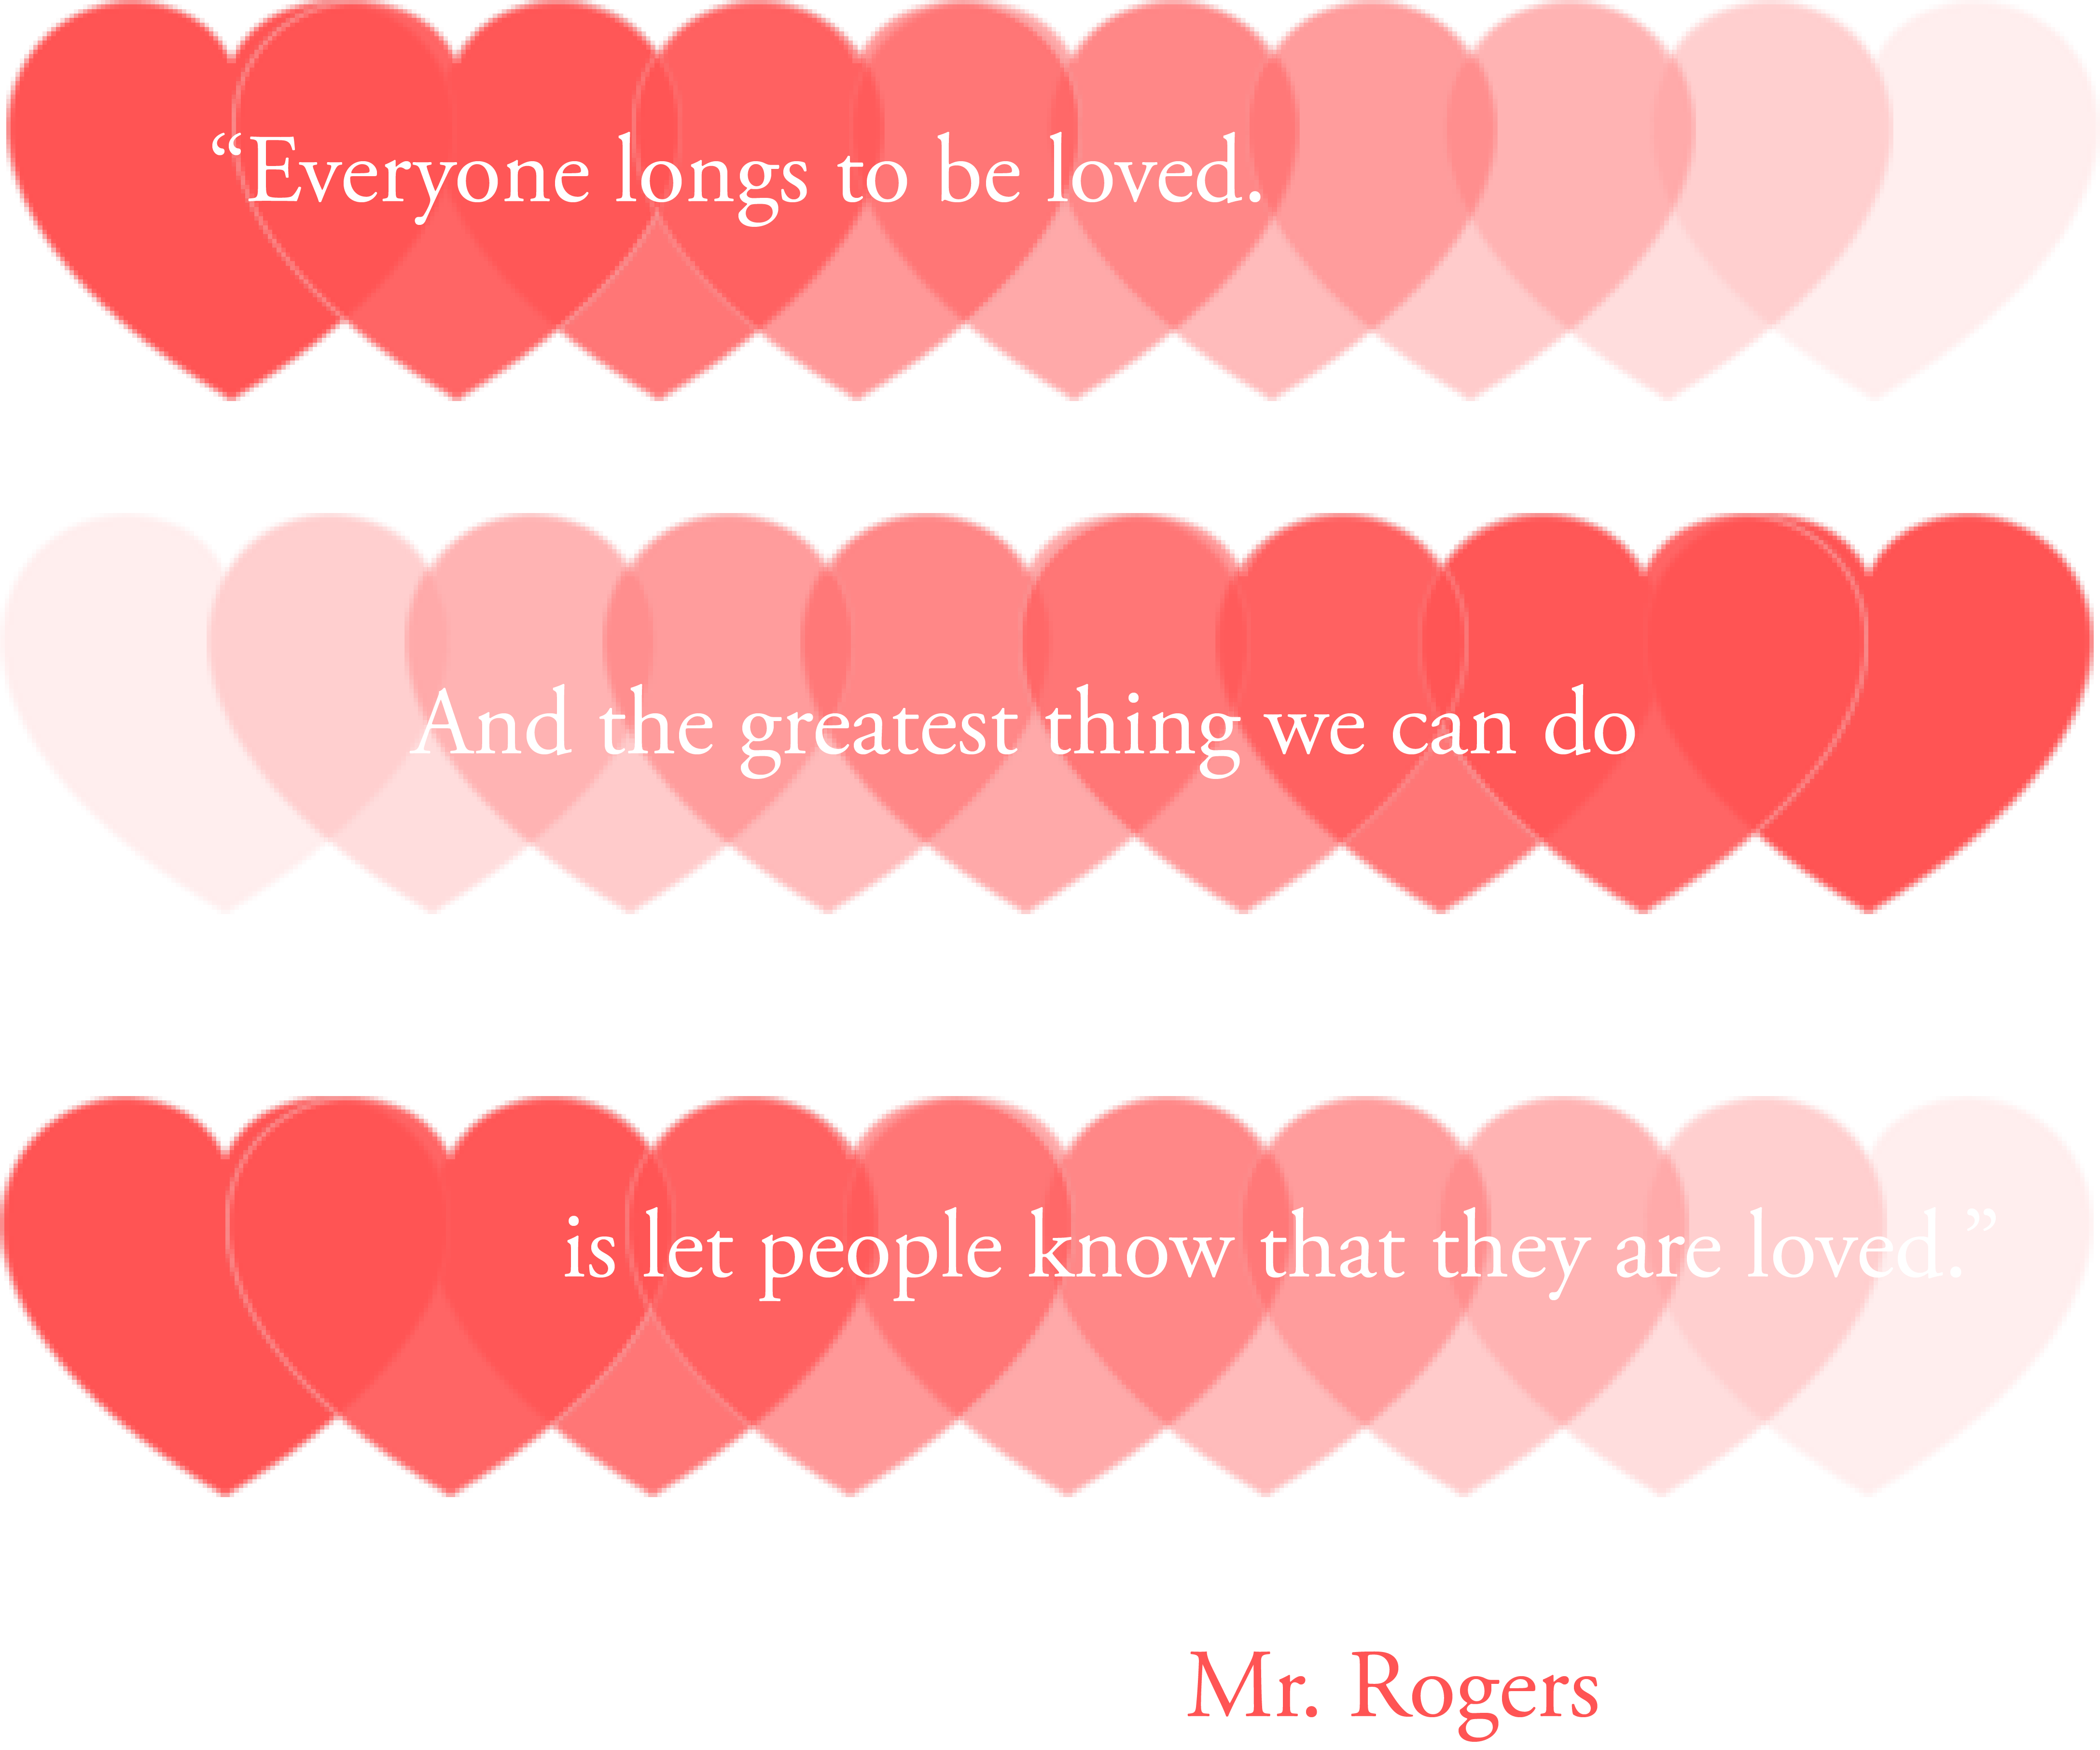 “Everyone longs to be loved. And the greatest thing we can do is to let people know that they are loved and capable of loving.” - Mr. Rogers motivational quote